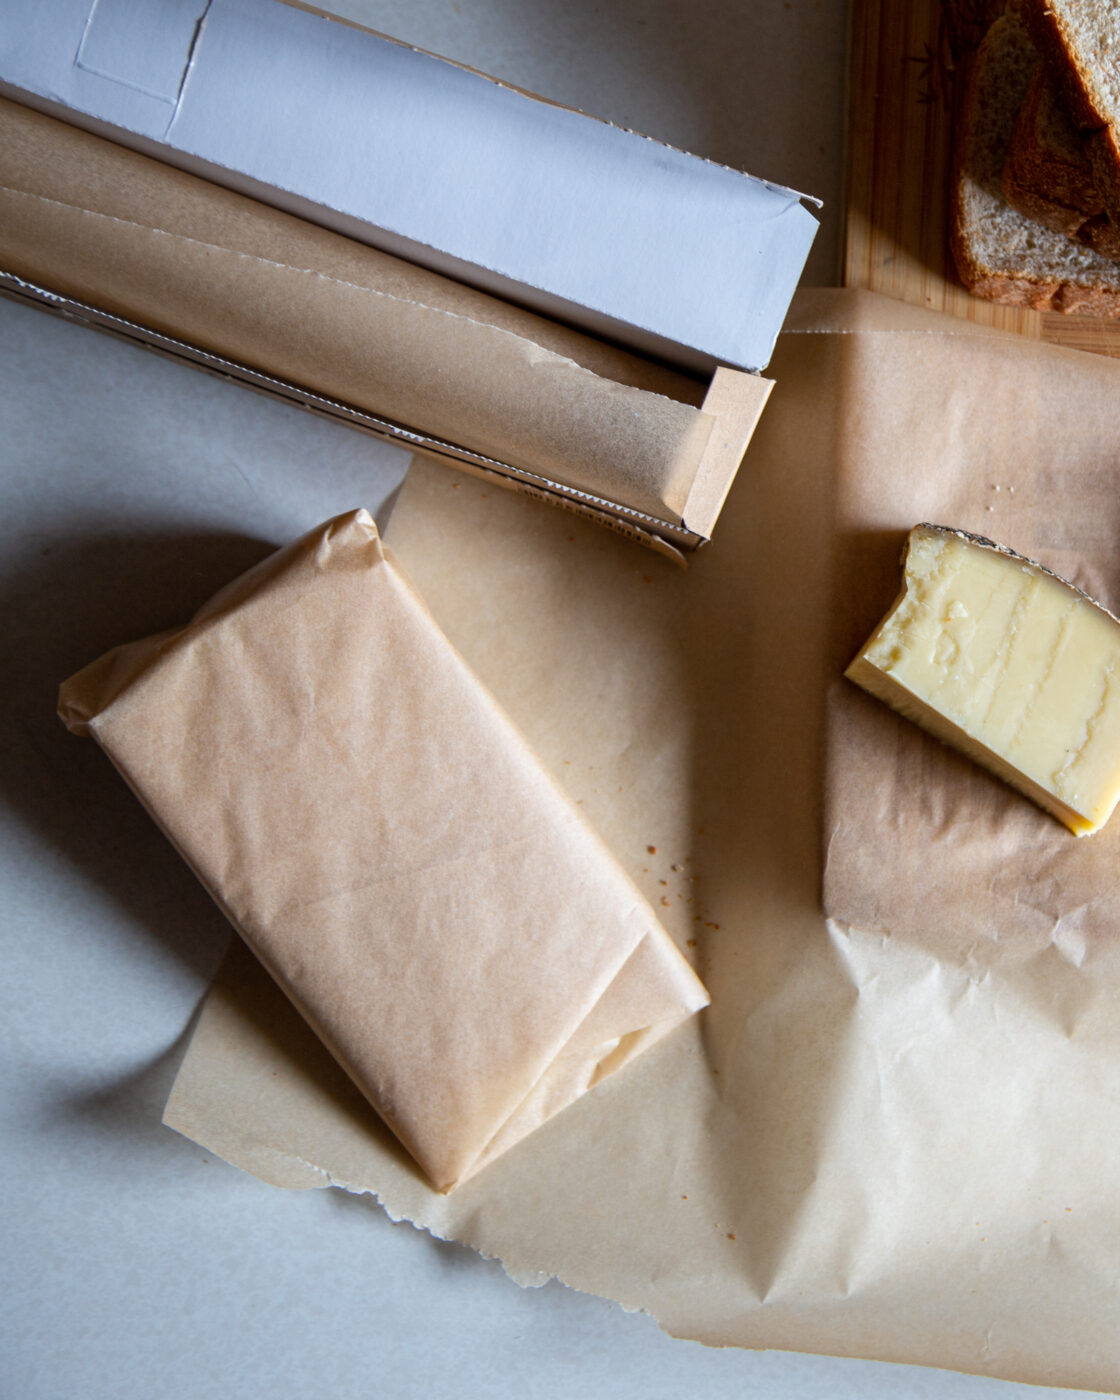 Your Favorite Cheese Might Not Actually Be Cheese At All